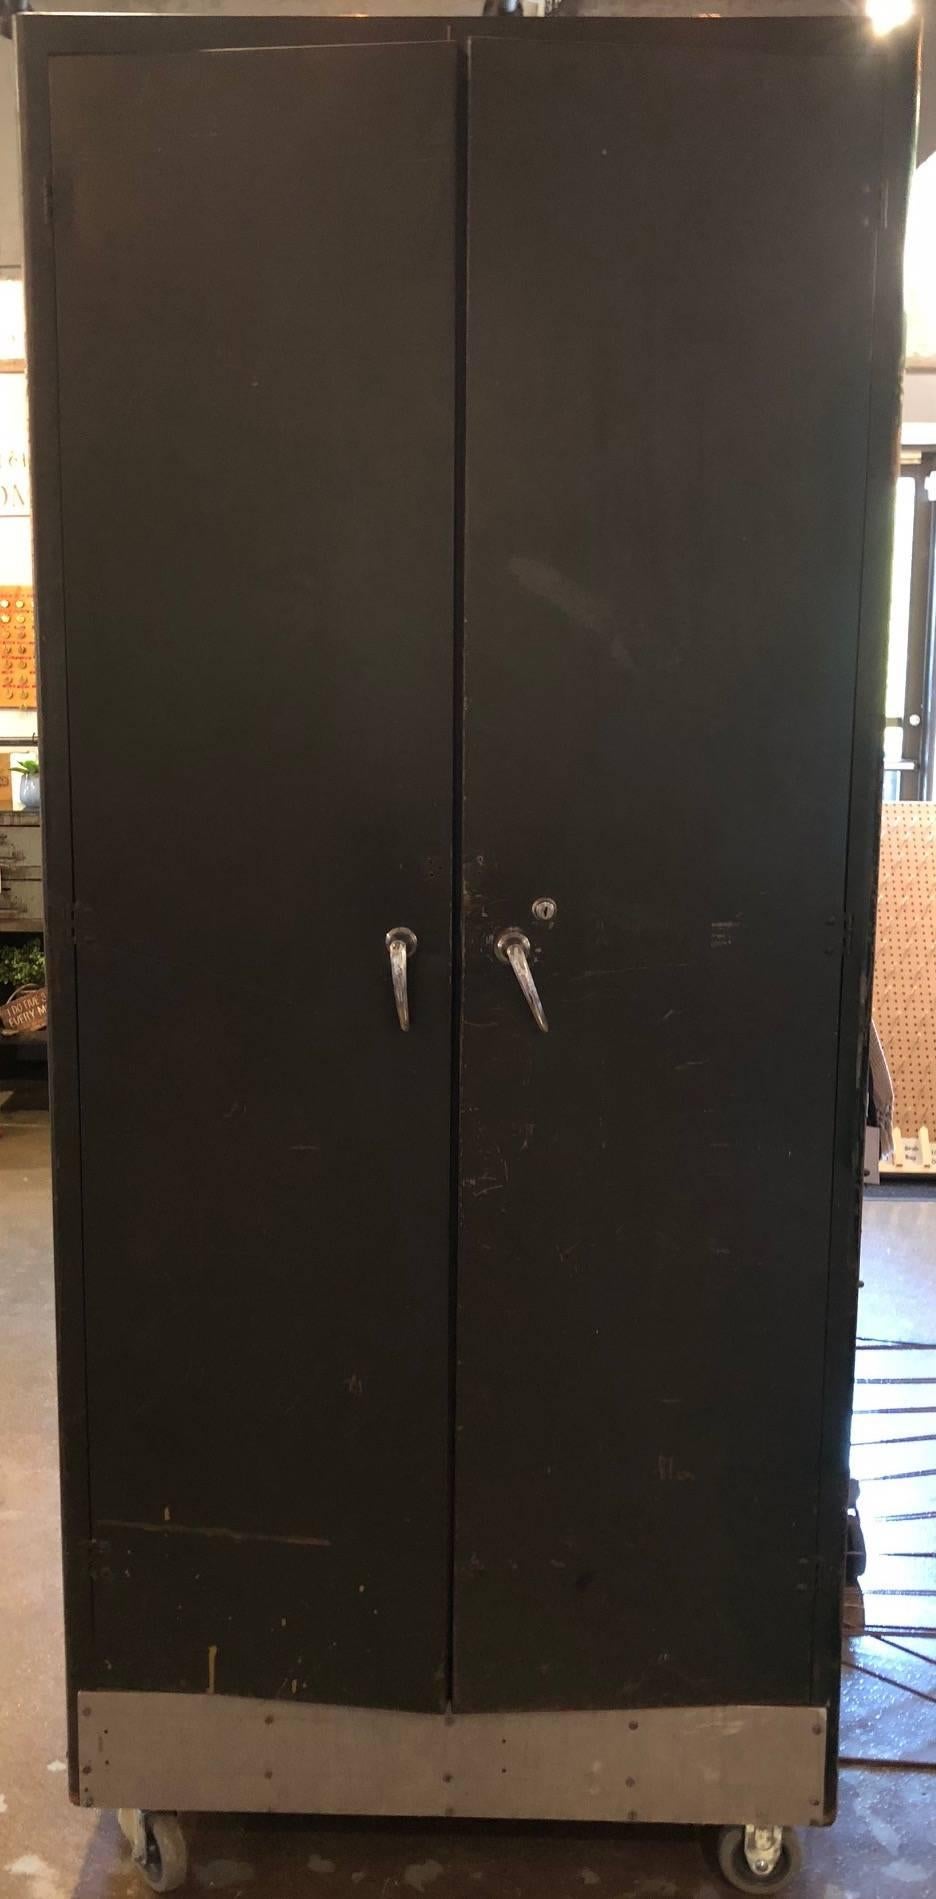 Storage locker / cabinet of steel on wheels divided into hanging closet and shelving for shoes, towels, hats and other clothing accessories. Industrial meets the functional home where storage is a major issue. Stands 7 feet tall. A walk-in closet on